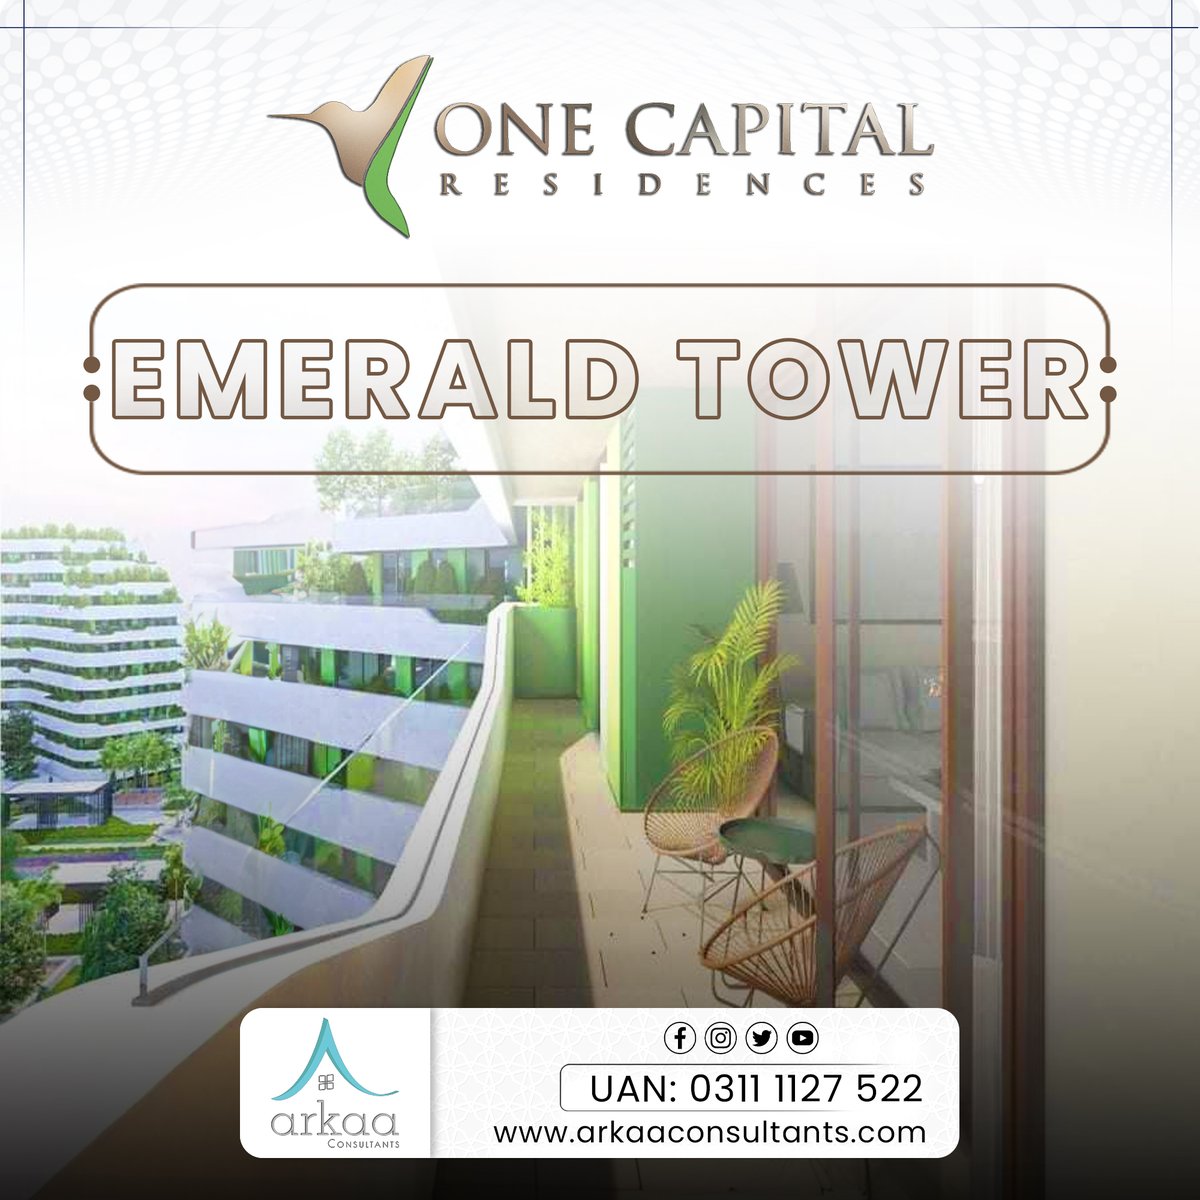 One Capital Residences is a high-end residential building in the heart of Islamabad.

#capitalsmartcity #arkaaconsultants #smartinterchange #SmartCities #propertyinvestment  #onecapitalresidences #CSC  #apartmentliving #Islamabad #highendrealestate #emeraldtowersapartment